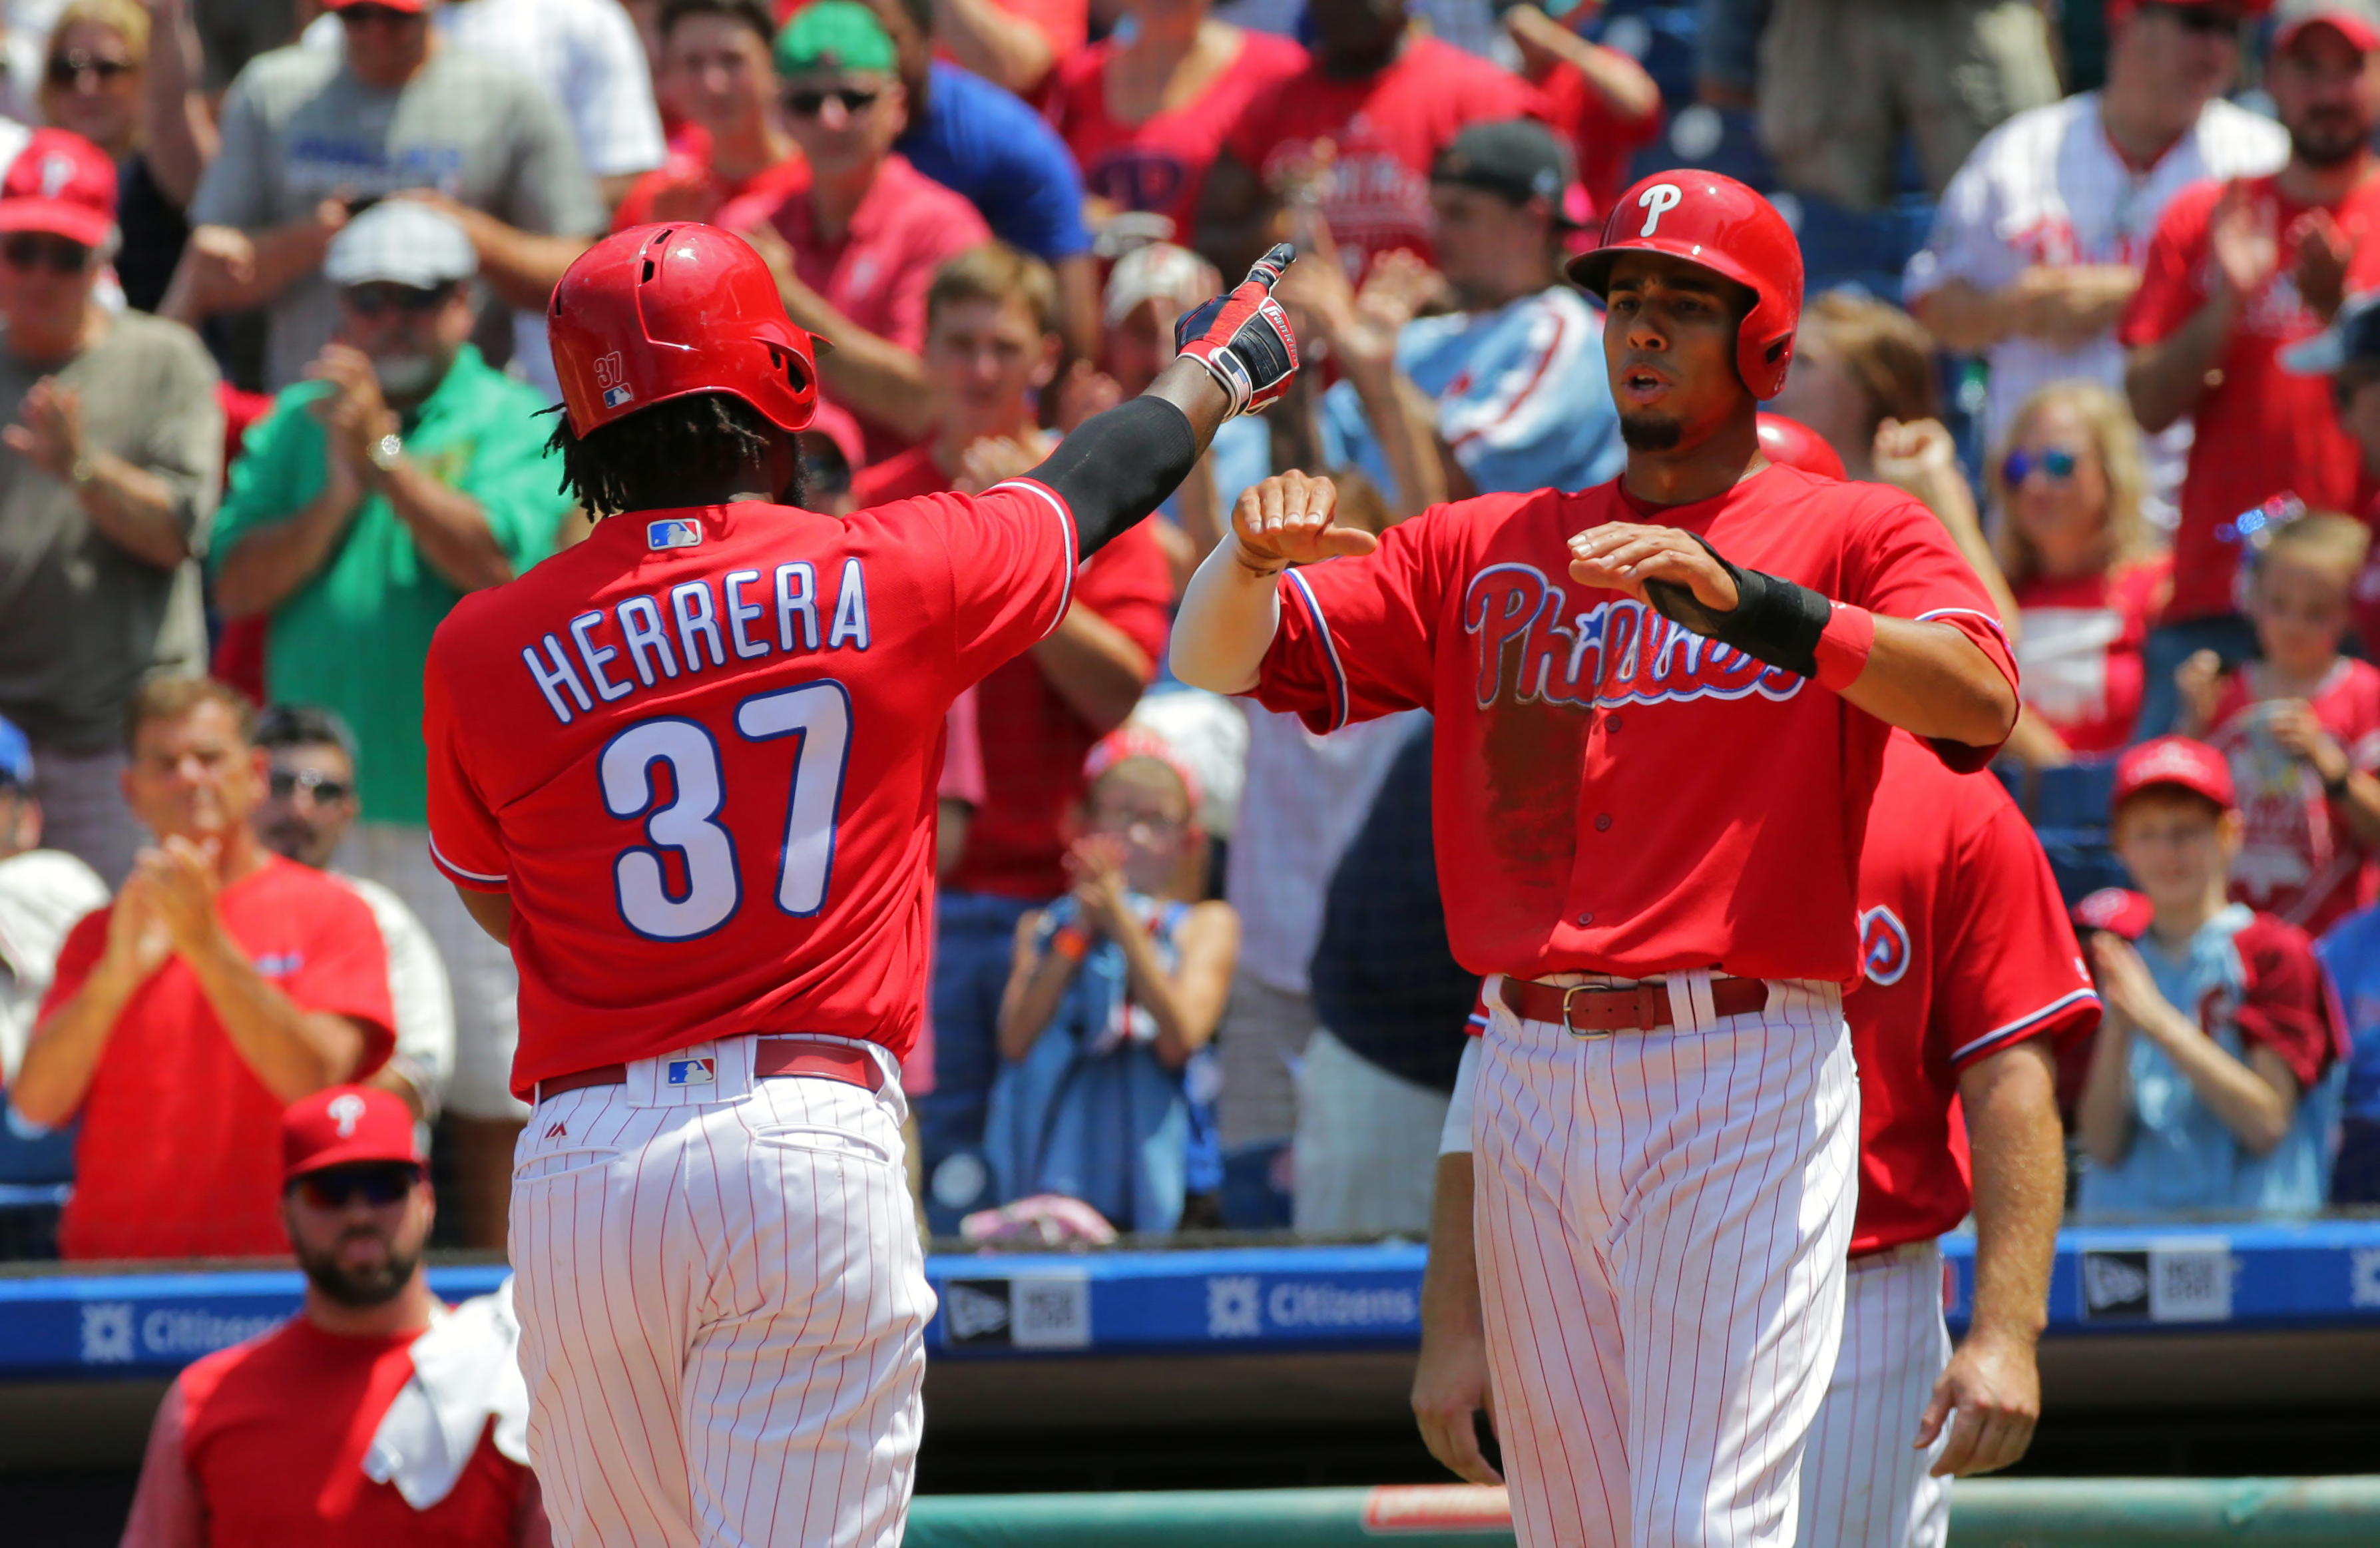 Phillies vs. Angels What you should know about the series